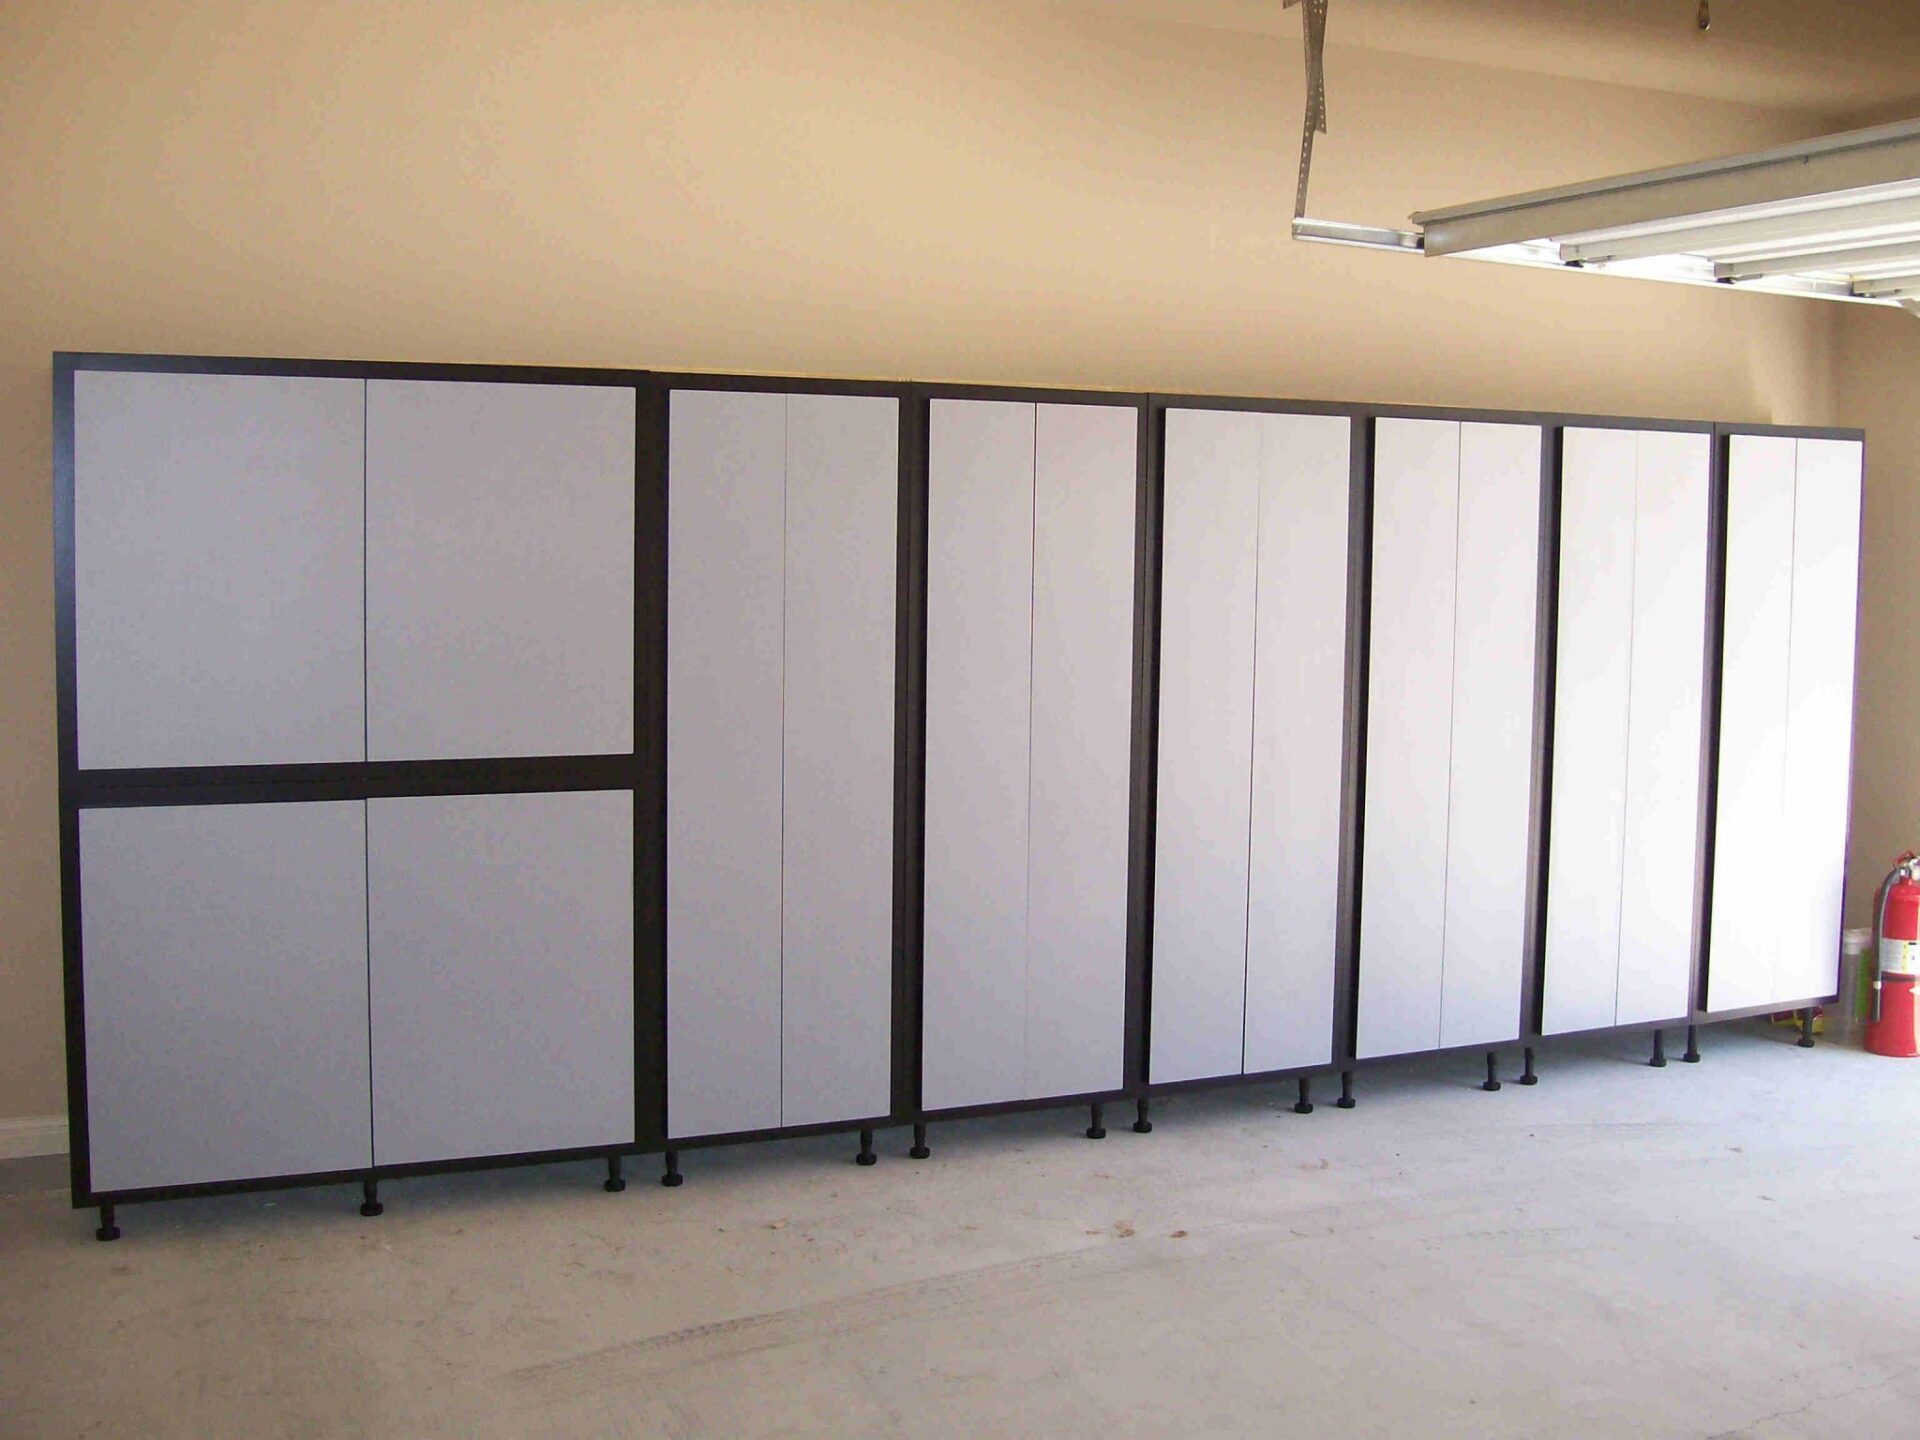 Custom Cabinets in garage, for extra storage. SmartSpaces.com